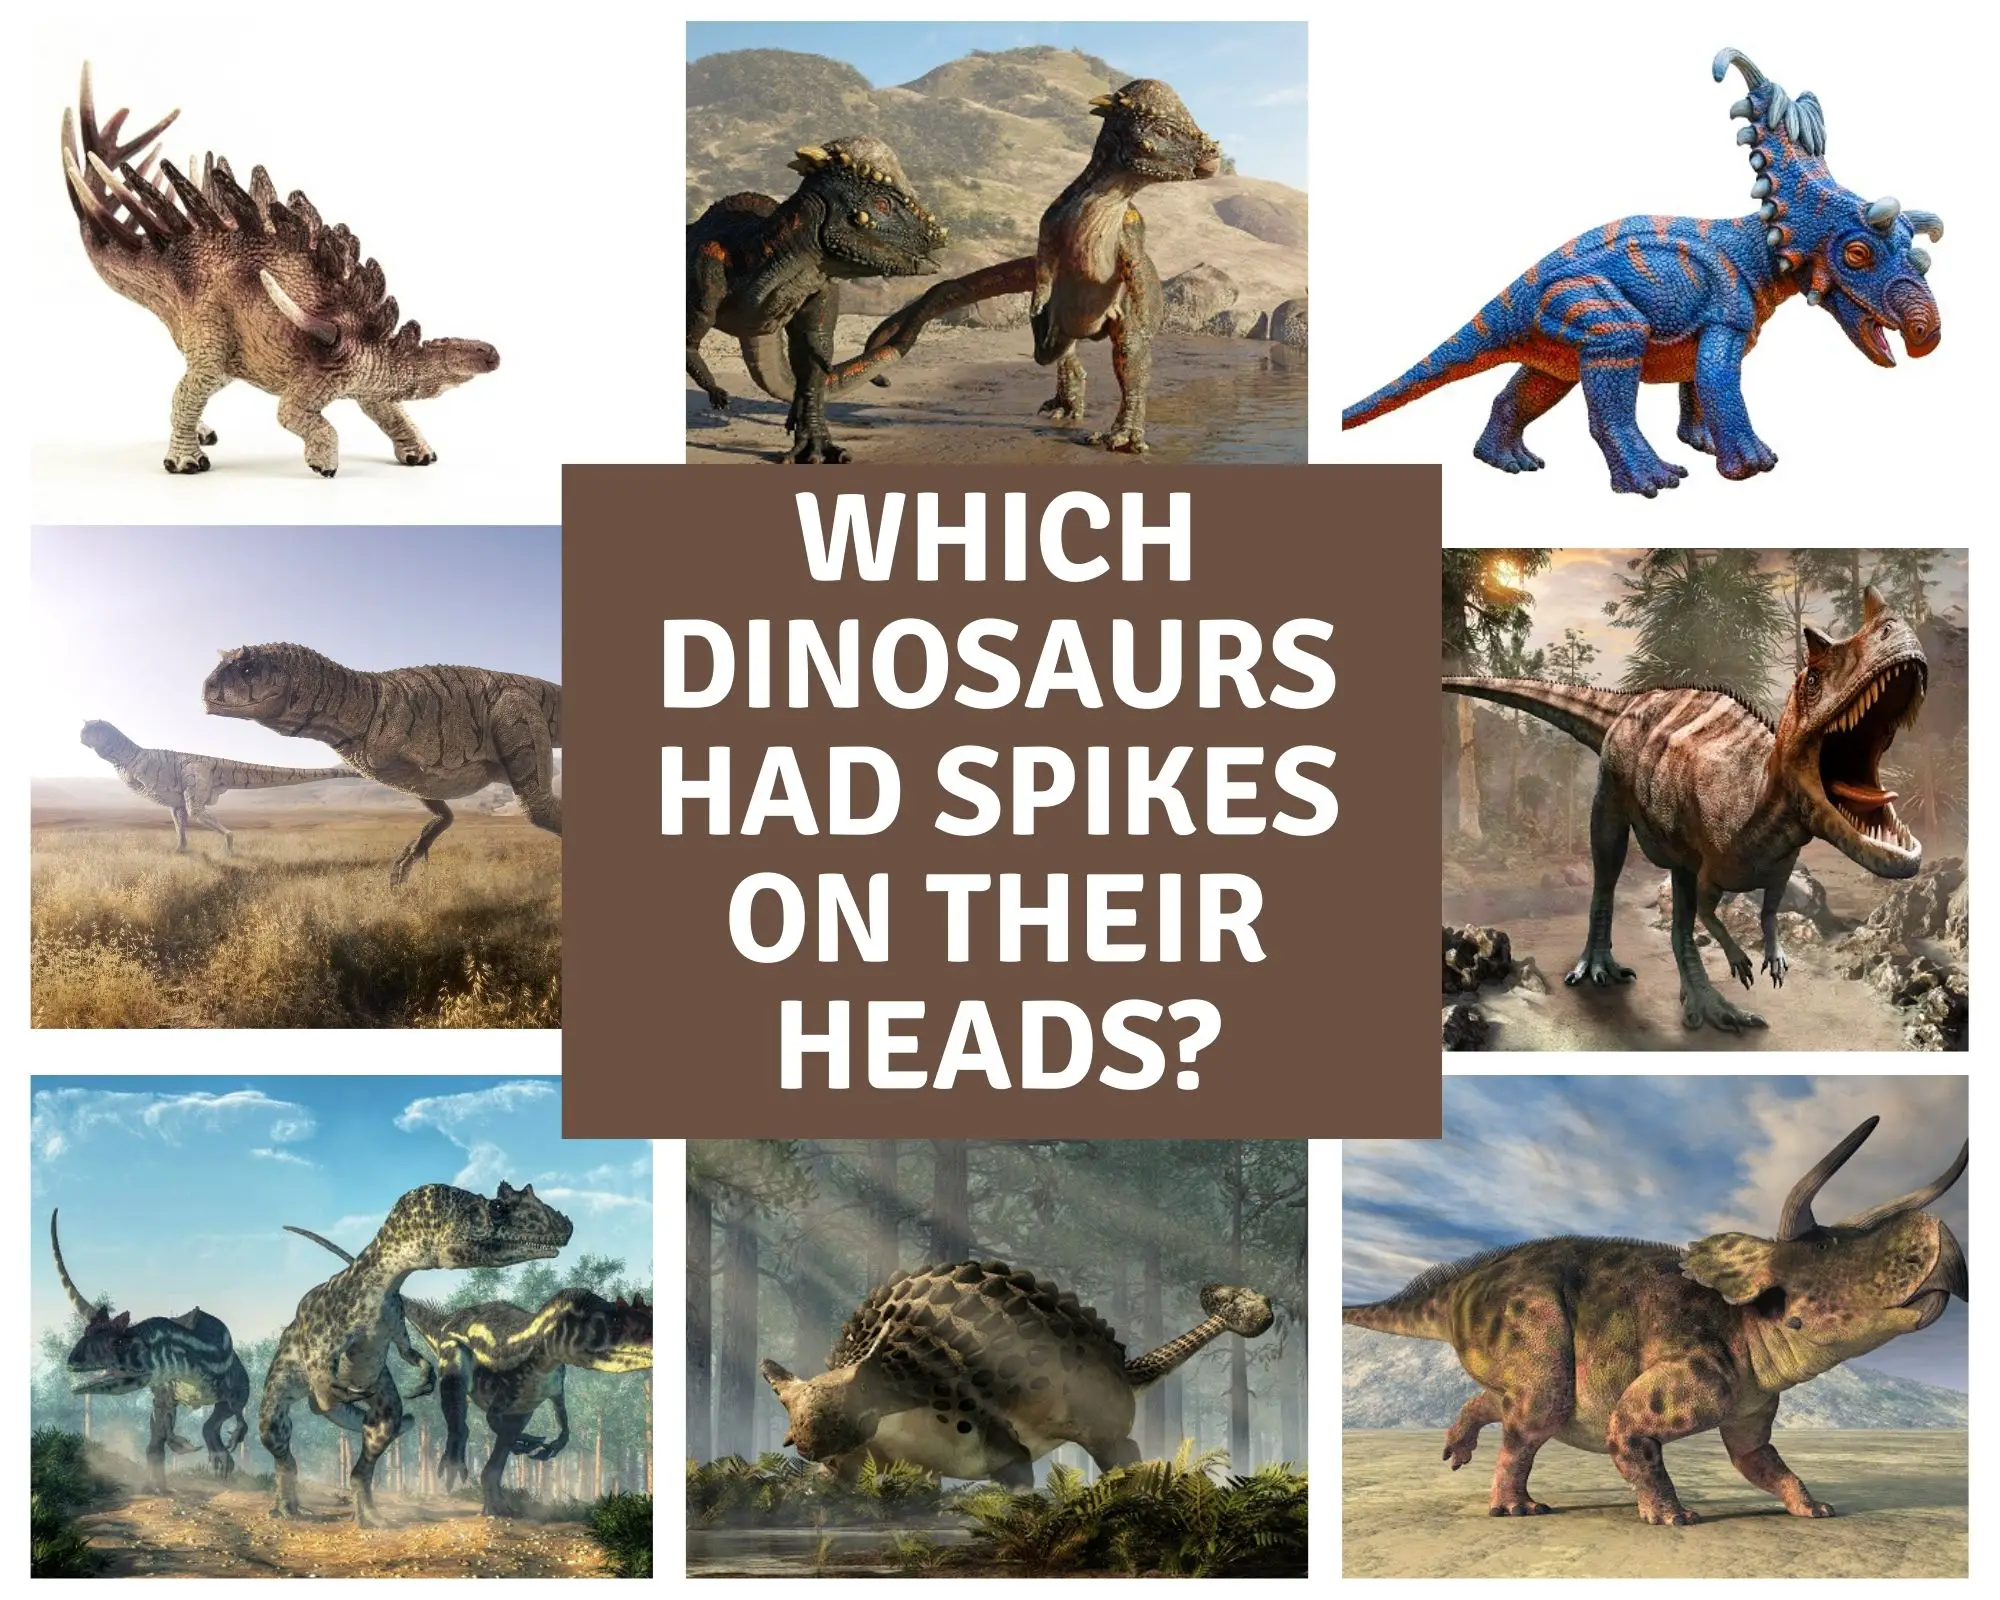 Which Dinosaurs Had Spikes on their Heads